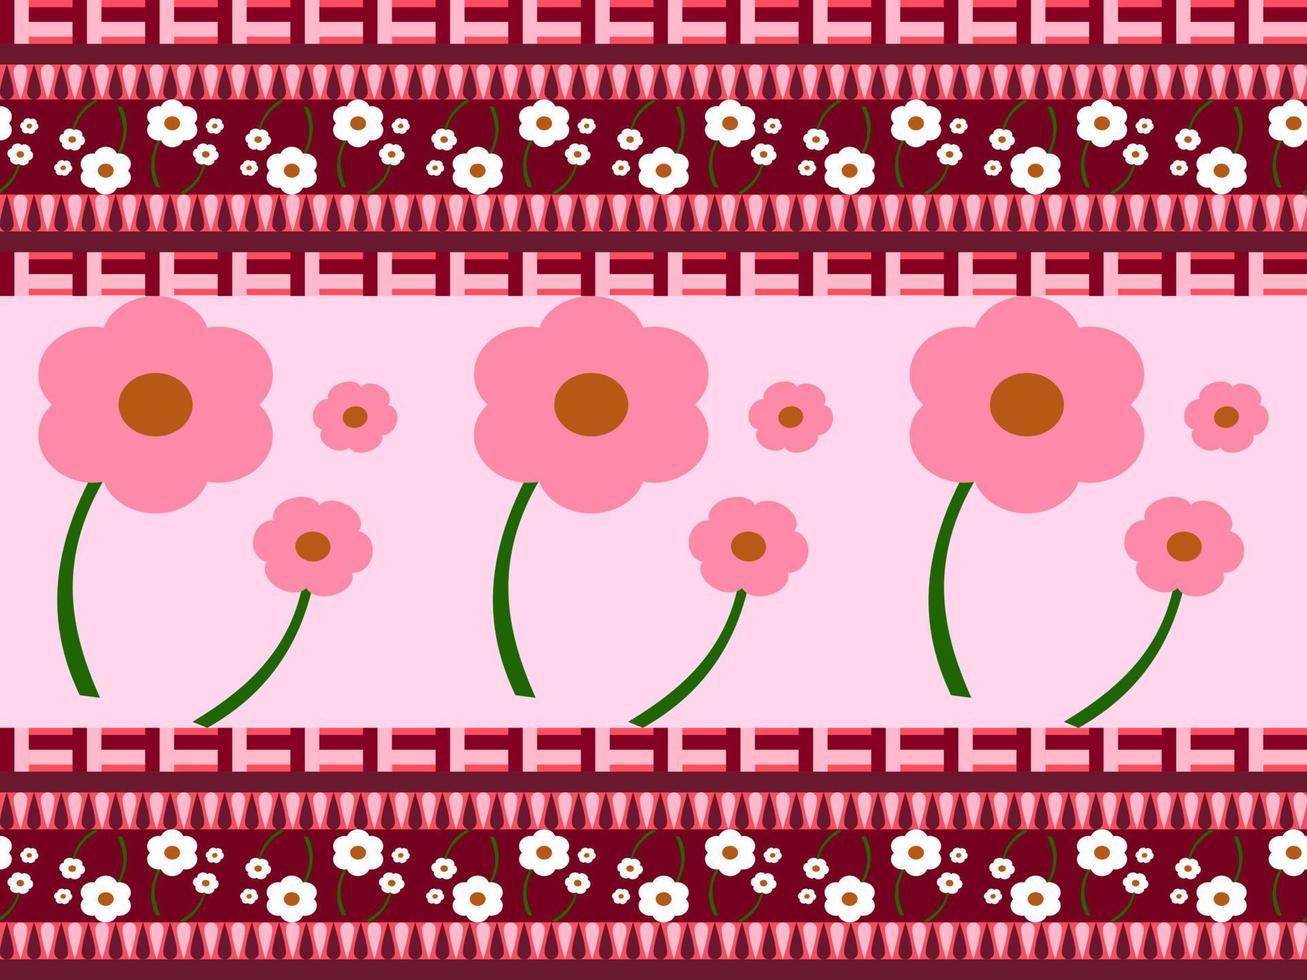 Flower cartoon character seamless pattern on pink background. vector